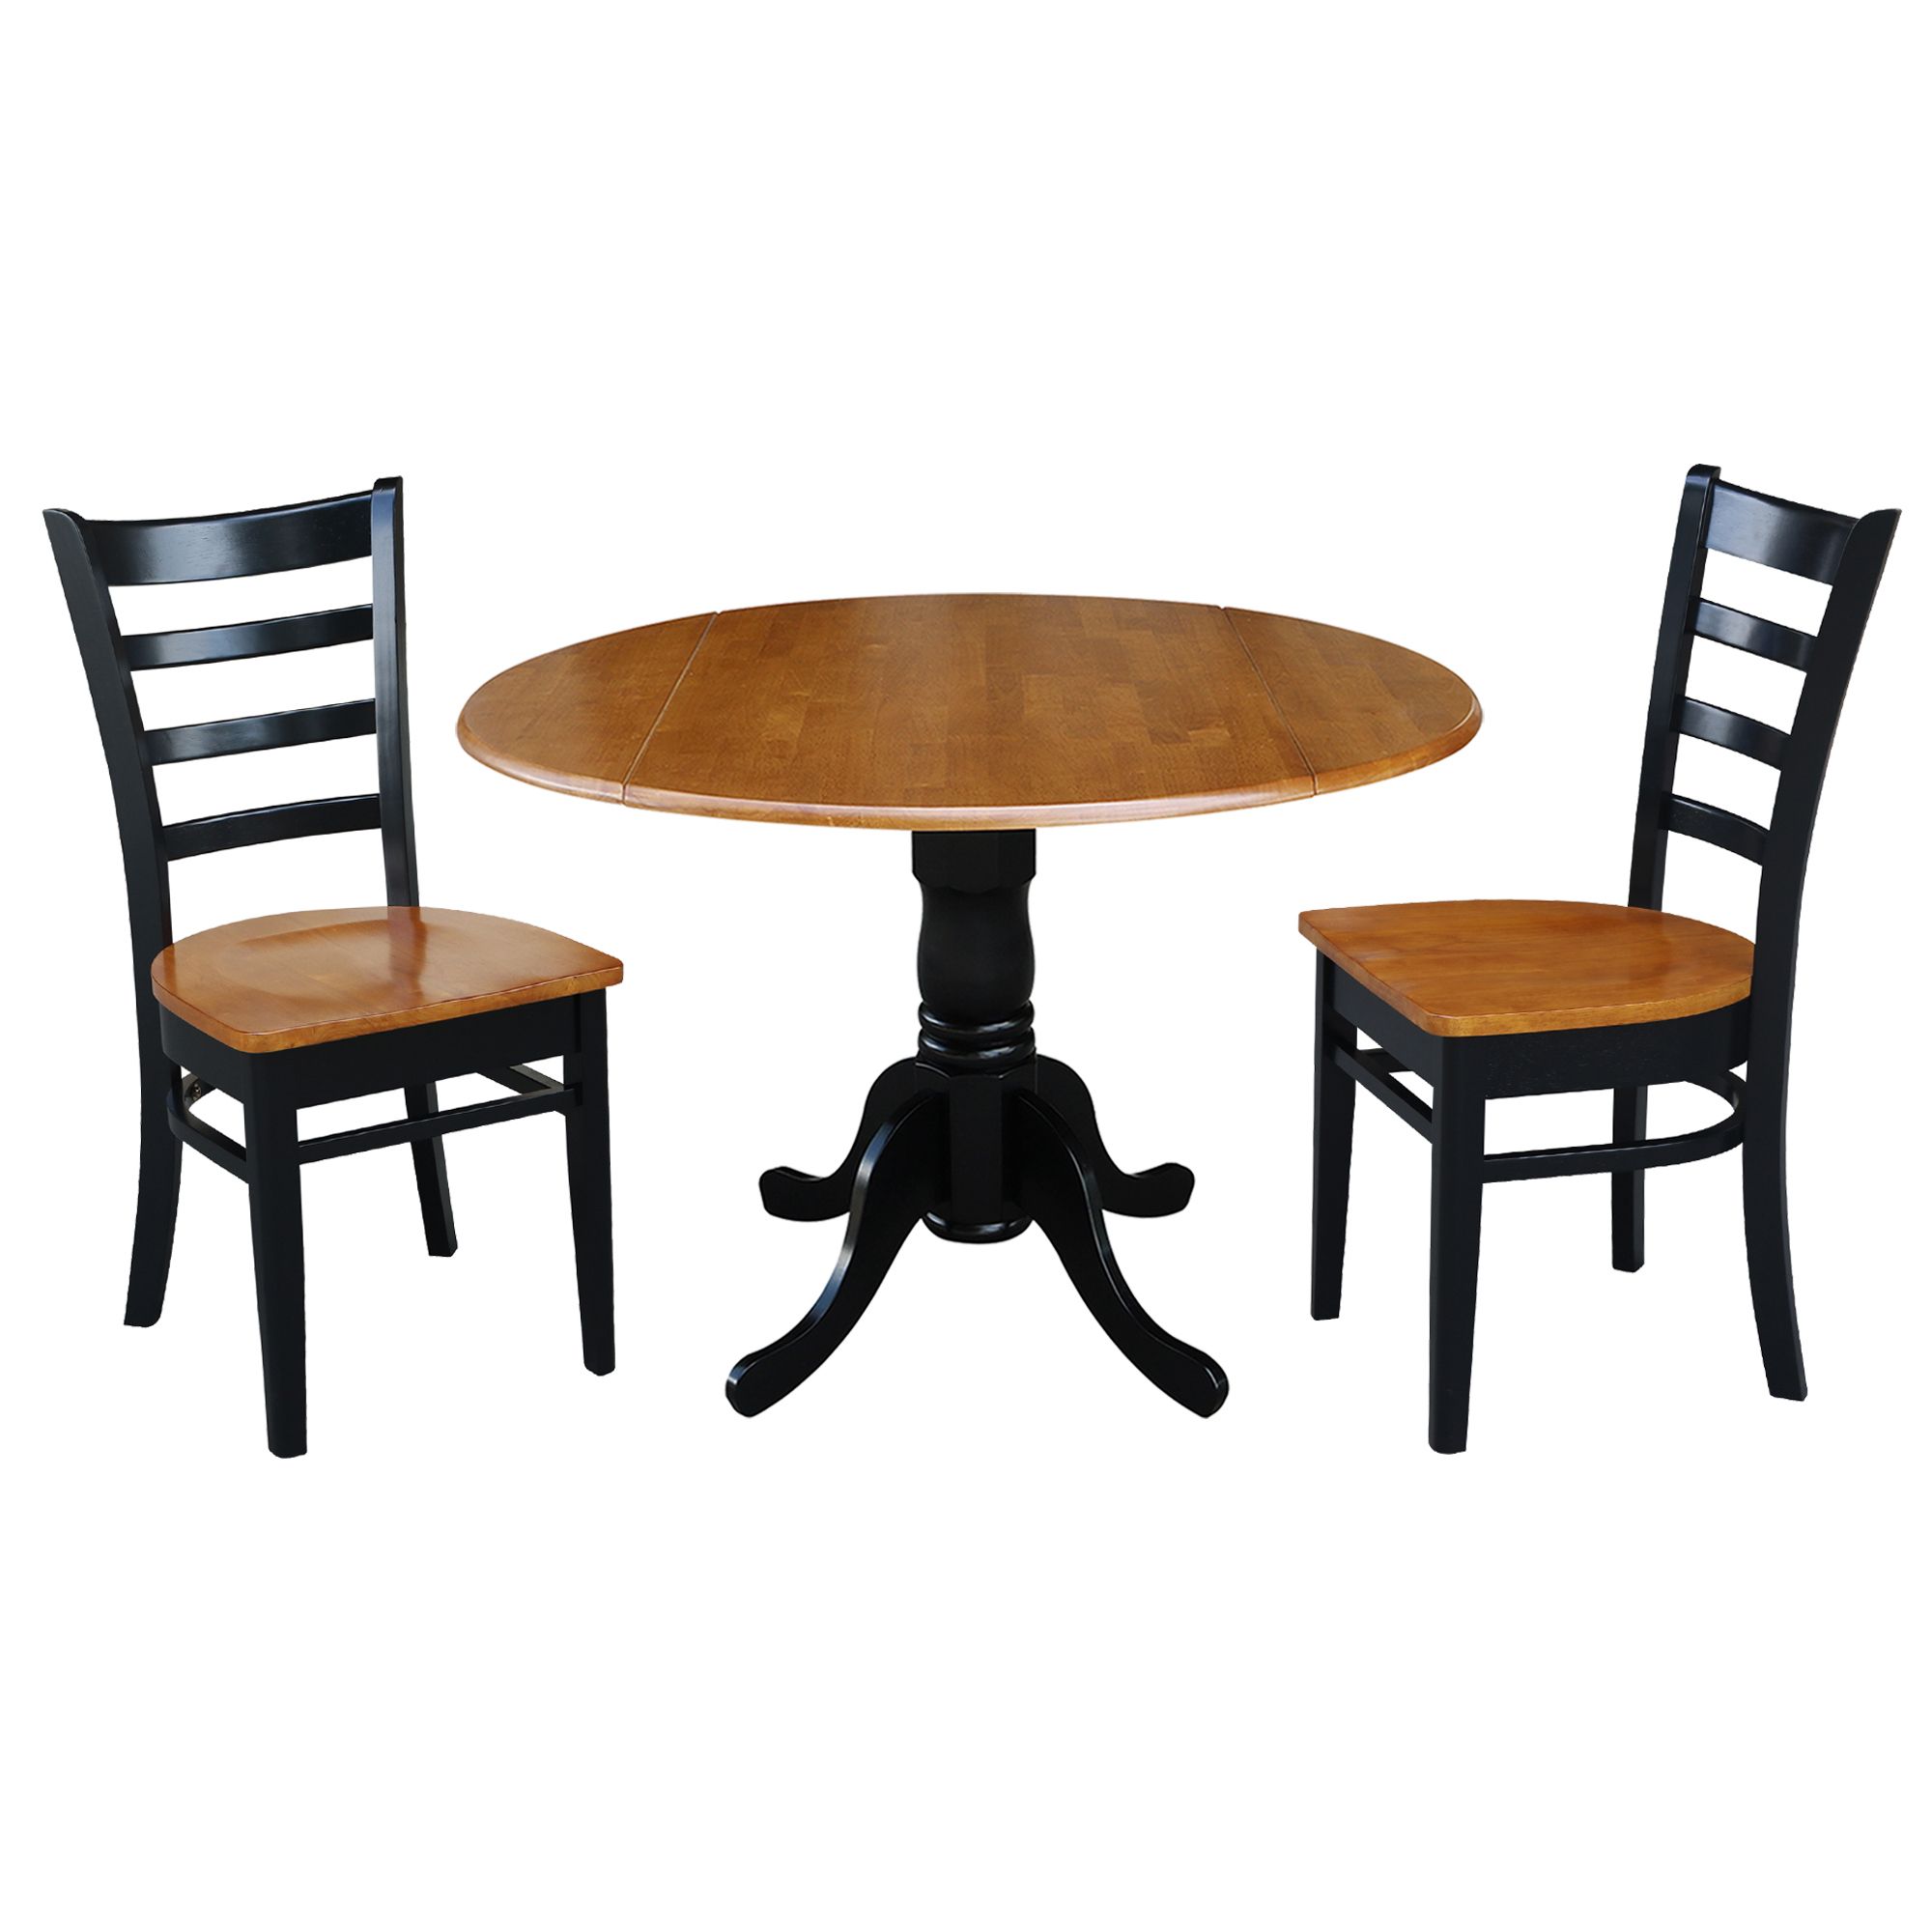 Dark Cherry Outdoor Tables Throughout Well Liked International Concepts Solid Wood 3 Piece Dining Set With 42 In (View 7 of 15)